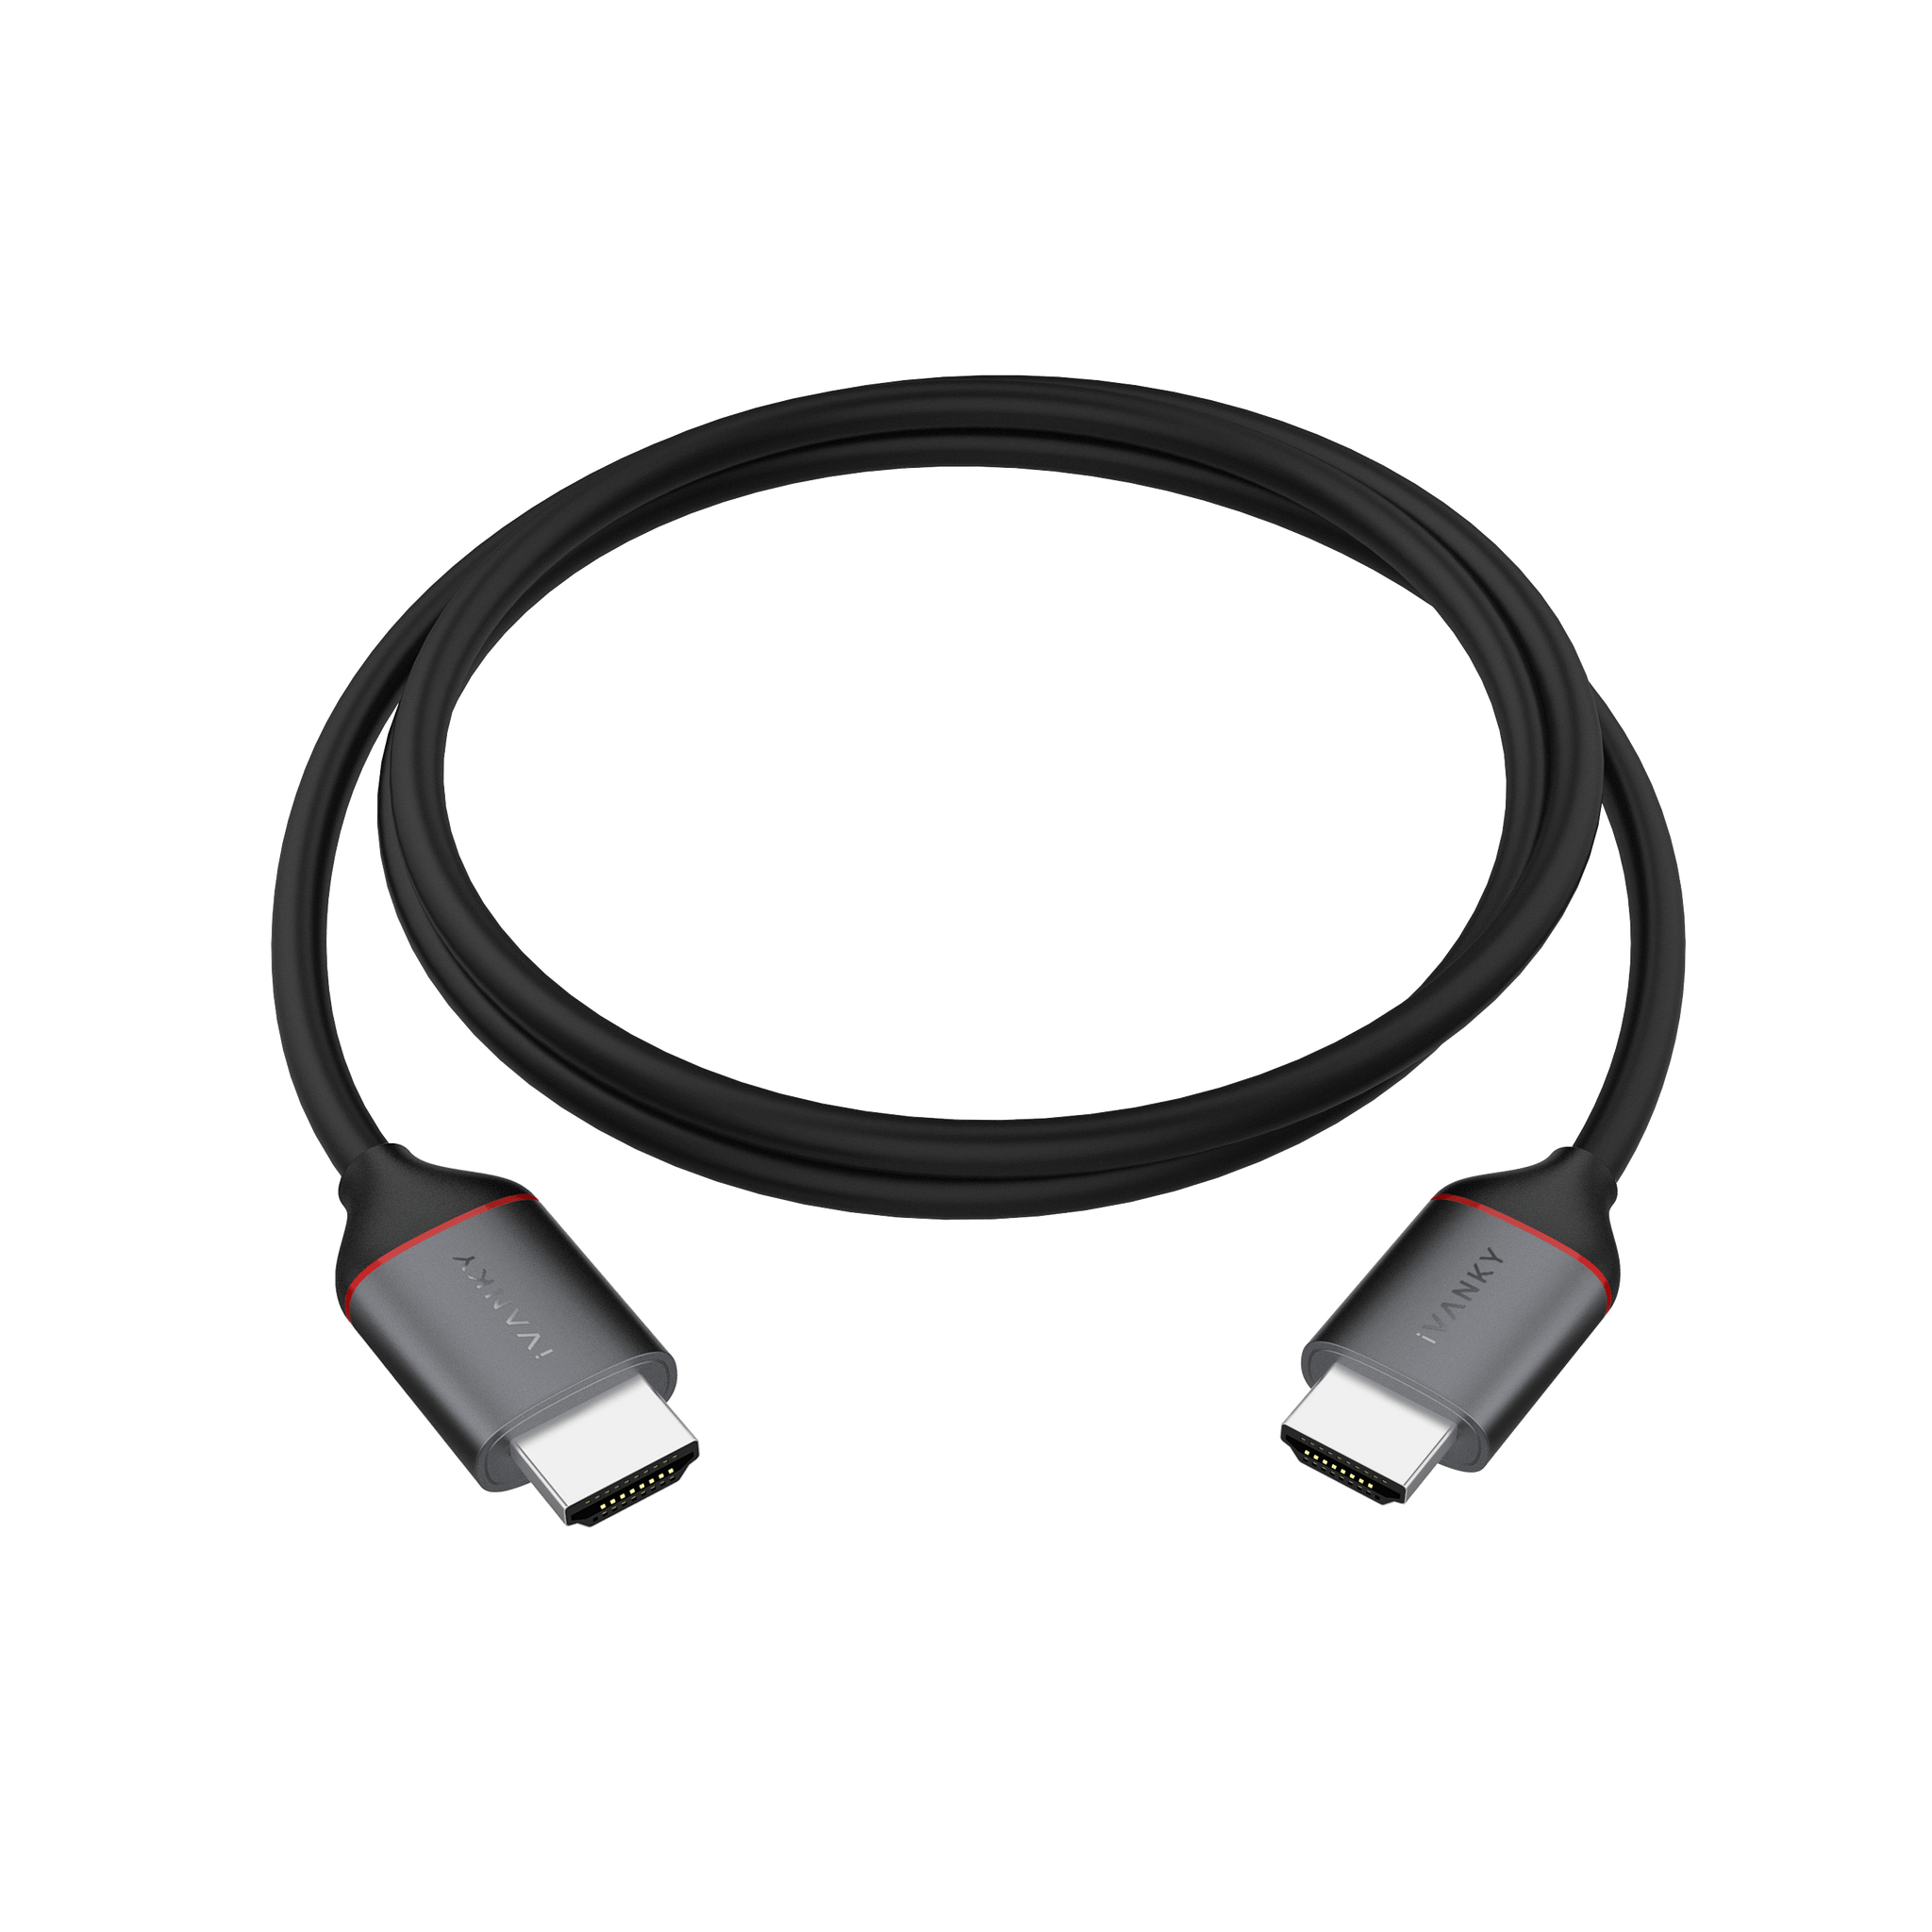 1ft (0.3m) USB-C® to HDMI® Audio/Video Adapter Cable - 4K 60Hz